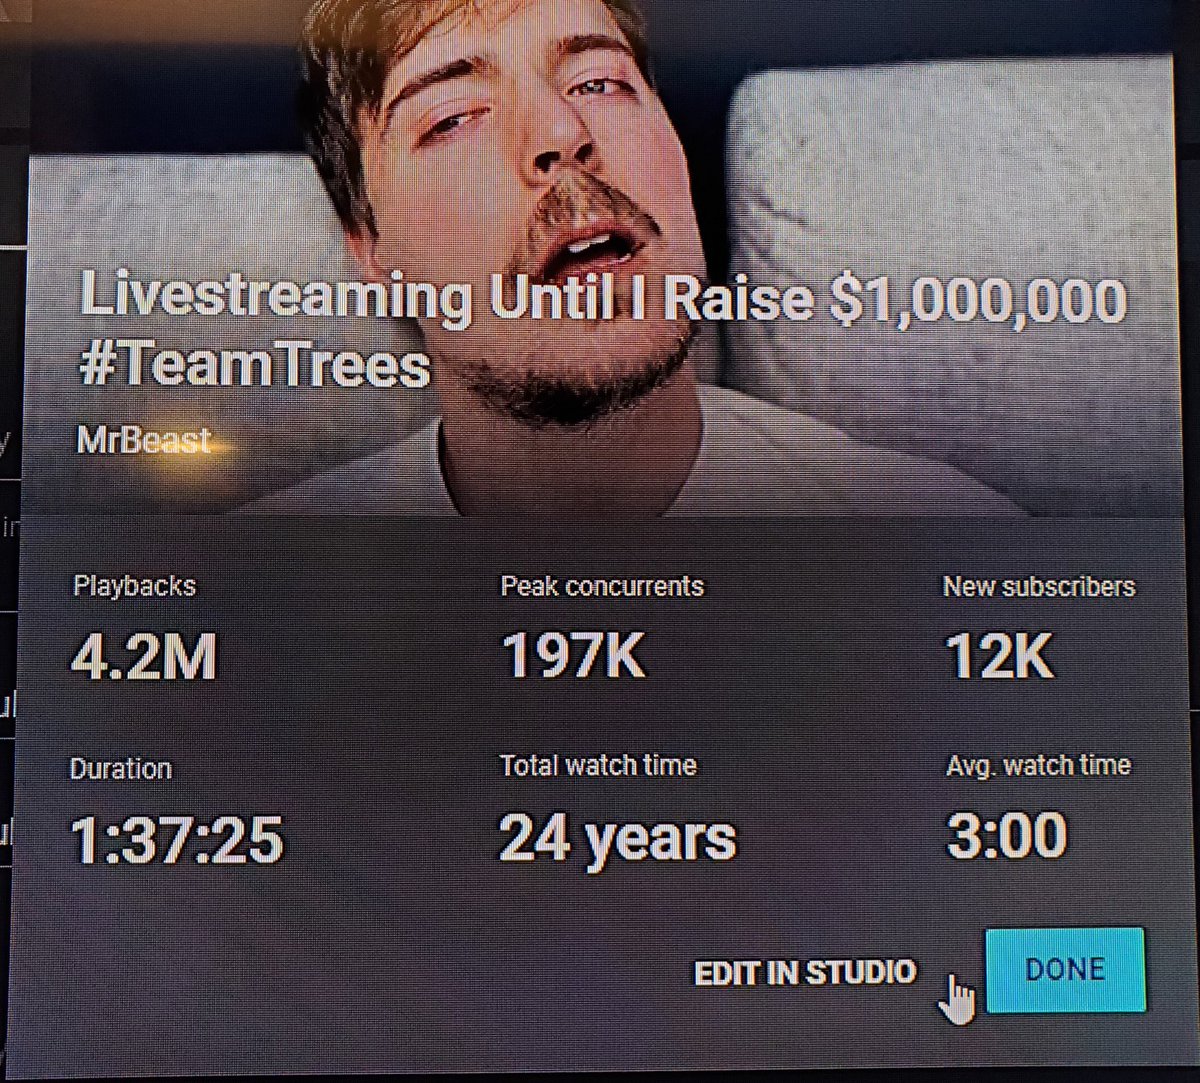 One of my best memories was helping @MrBeast setup his stream for #teamtrees back in 2019.

Planting 20 millions trees for hitting 20 million subs.

$1 = 1 Tree. It was amazing to be apart of.